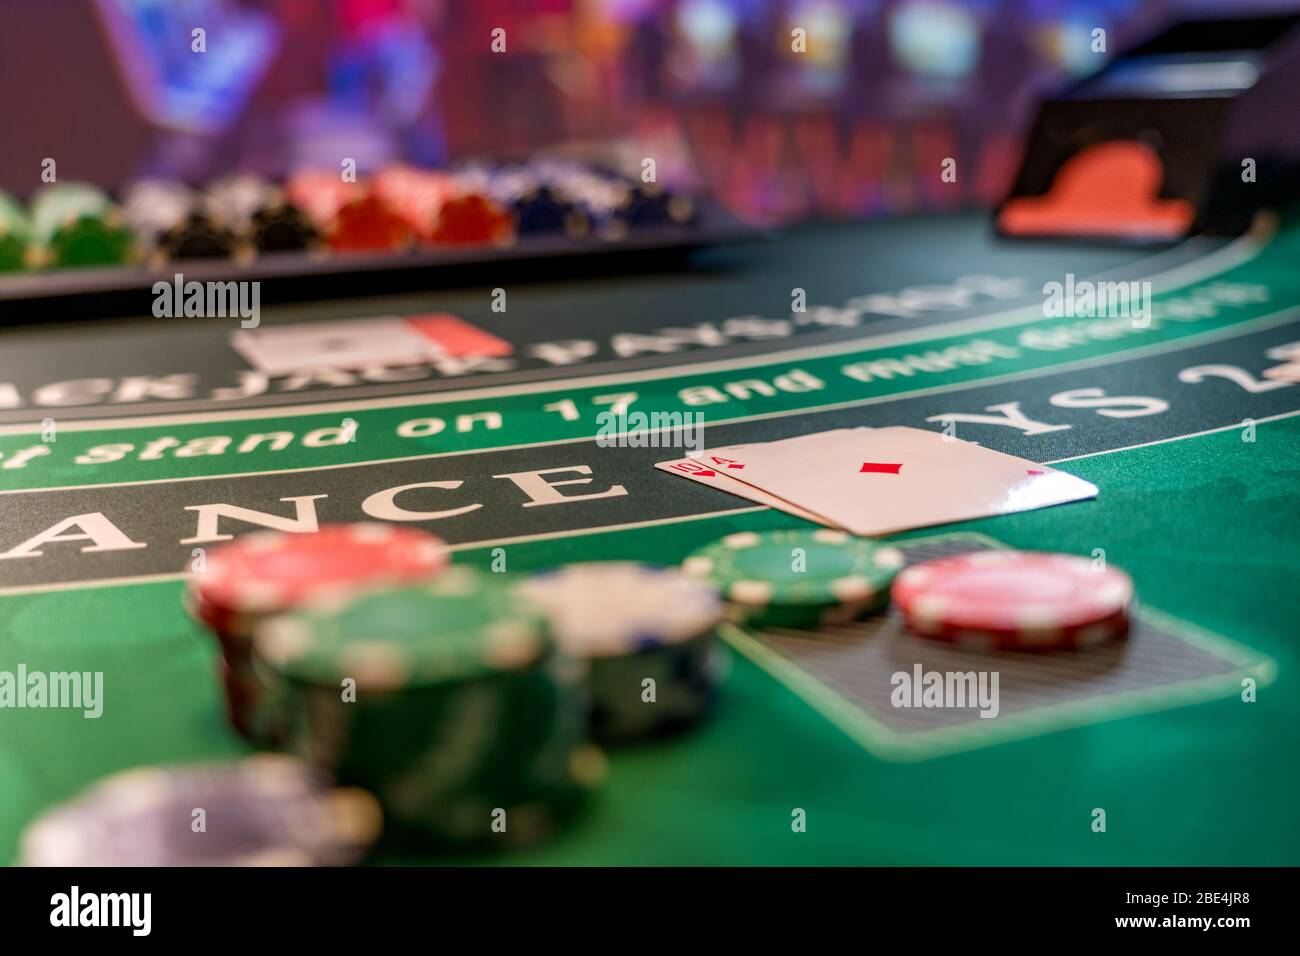 casino: Is Not That Difficult As You Think